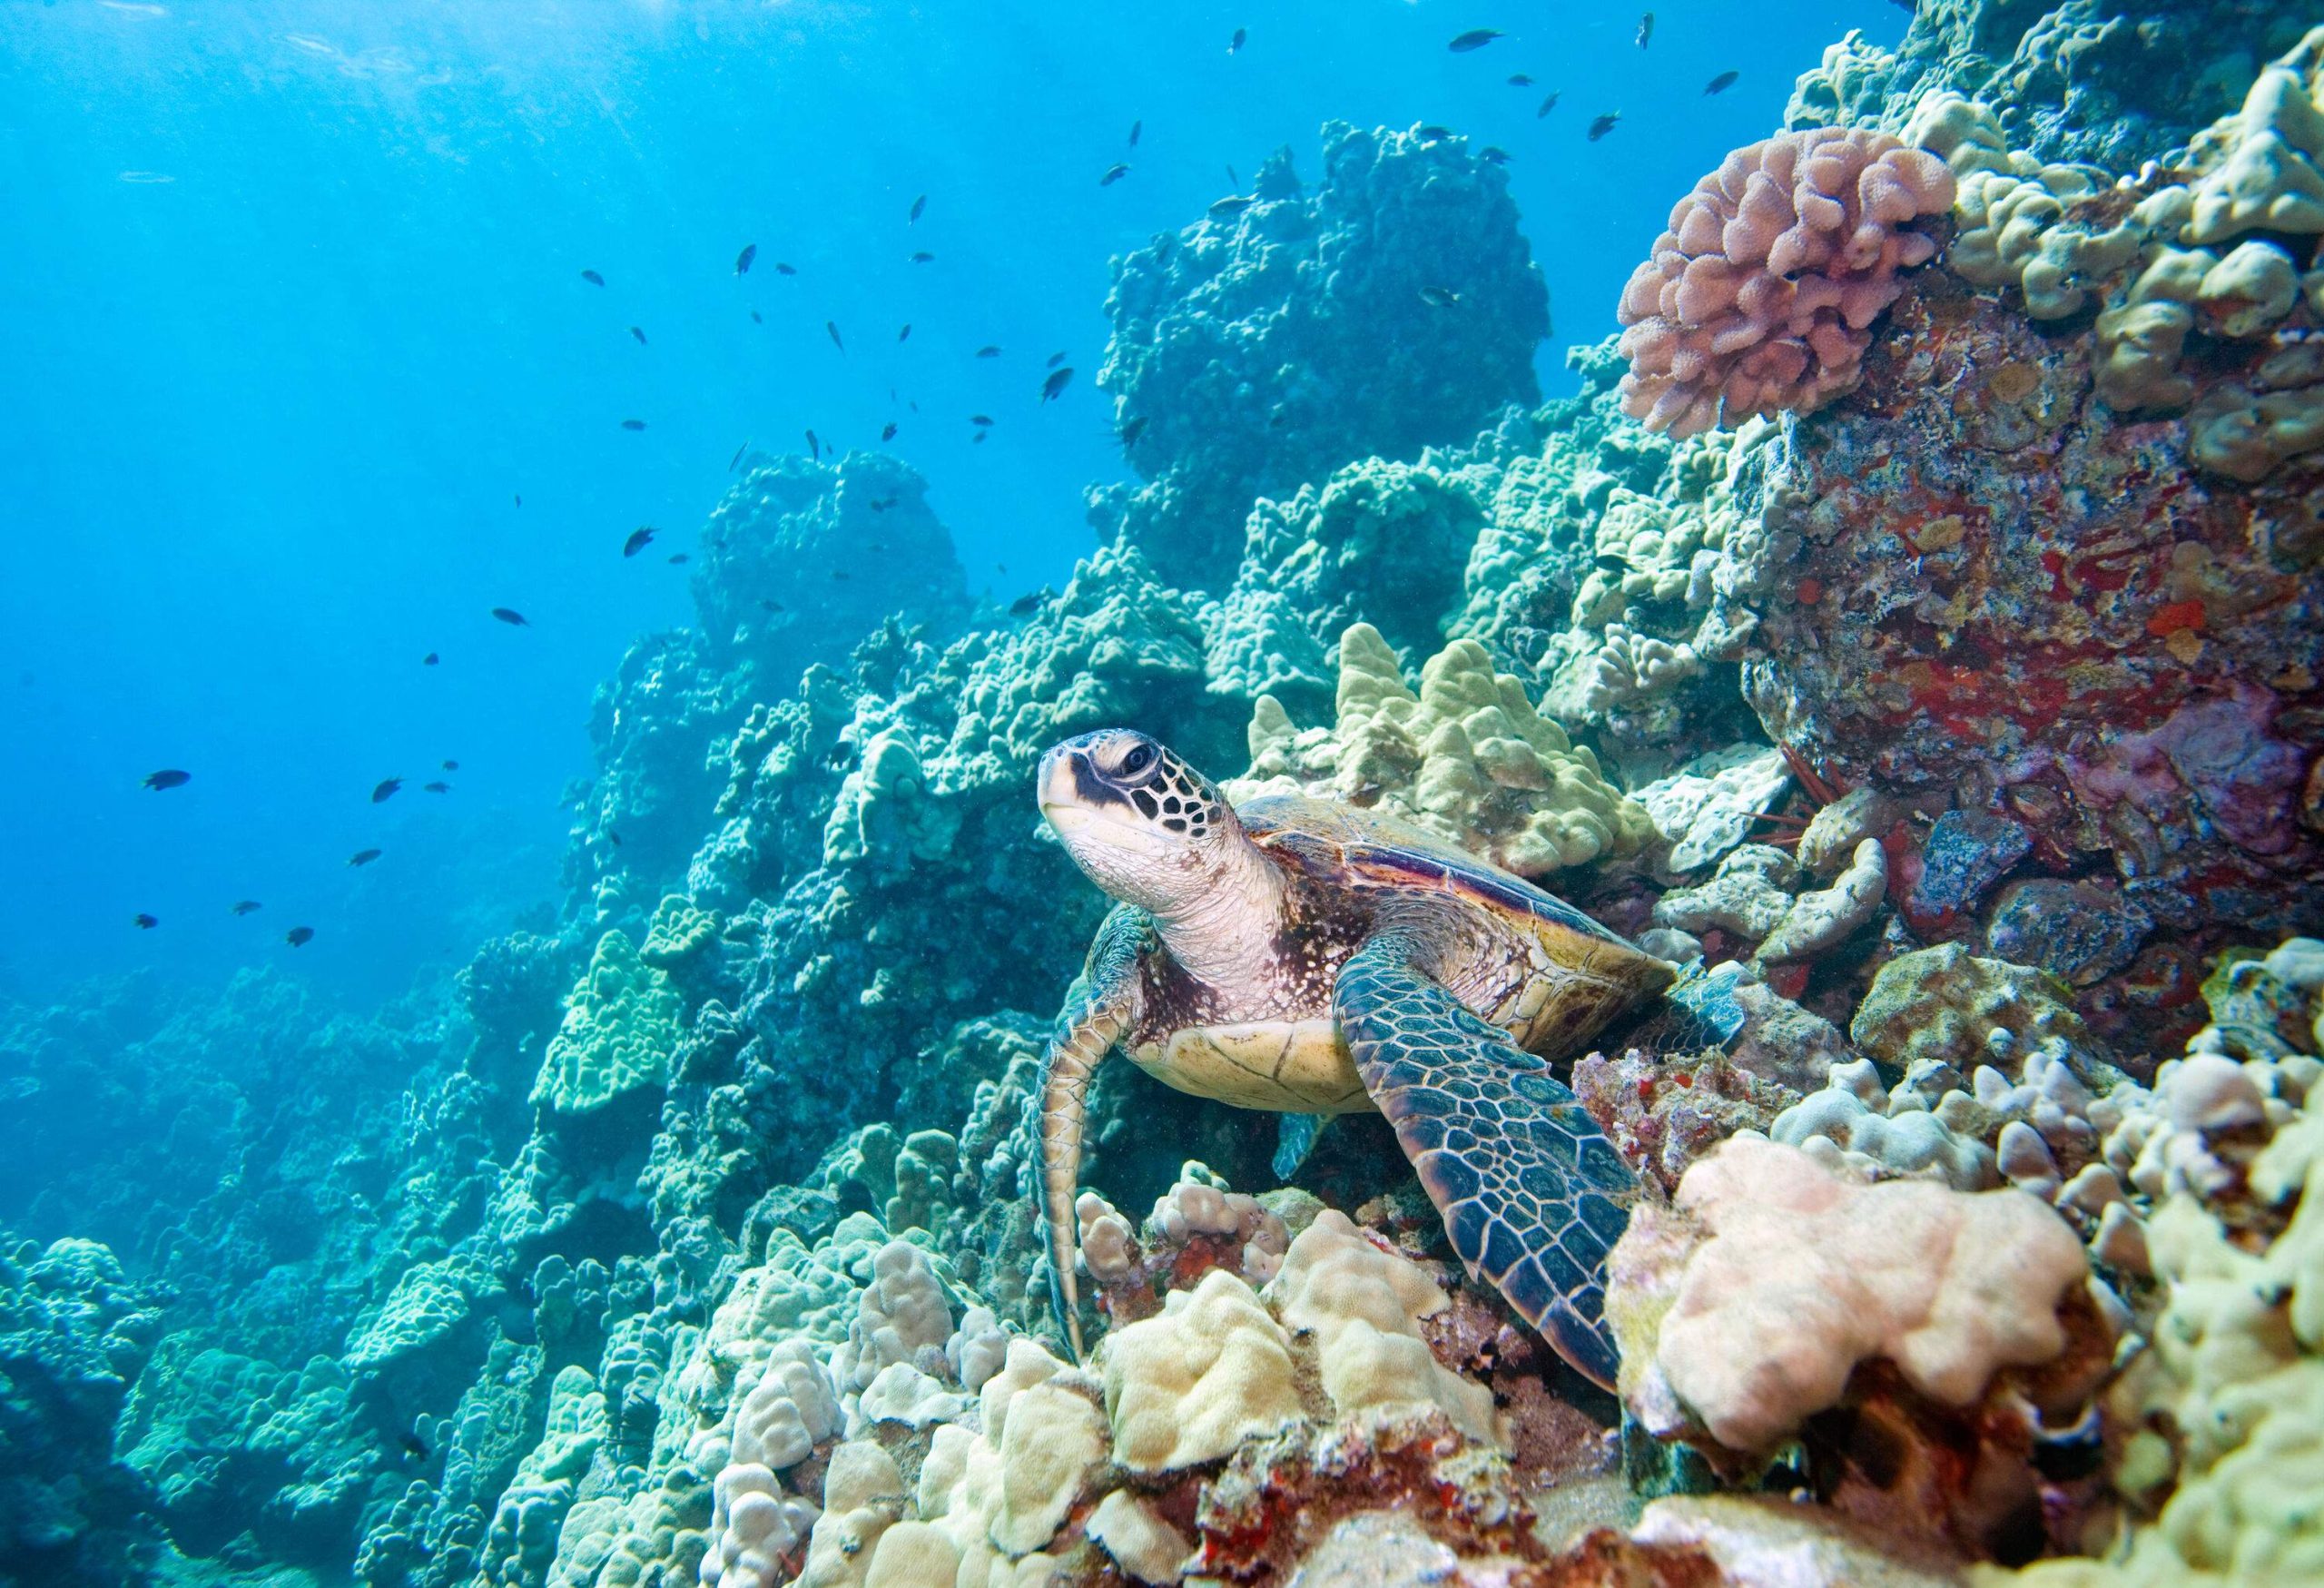 A green sea turtle swims underwater beside a colony of beautiful corals.